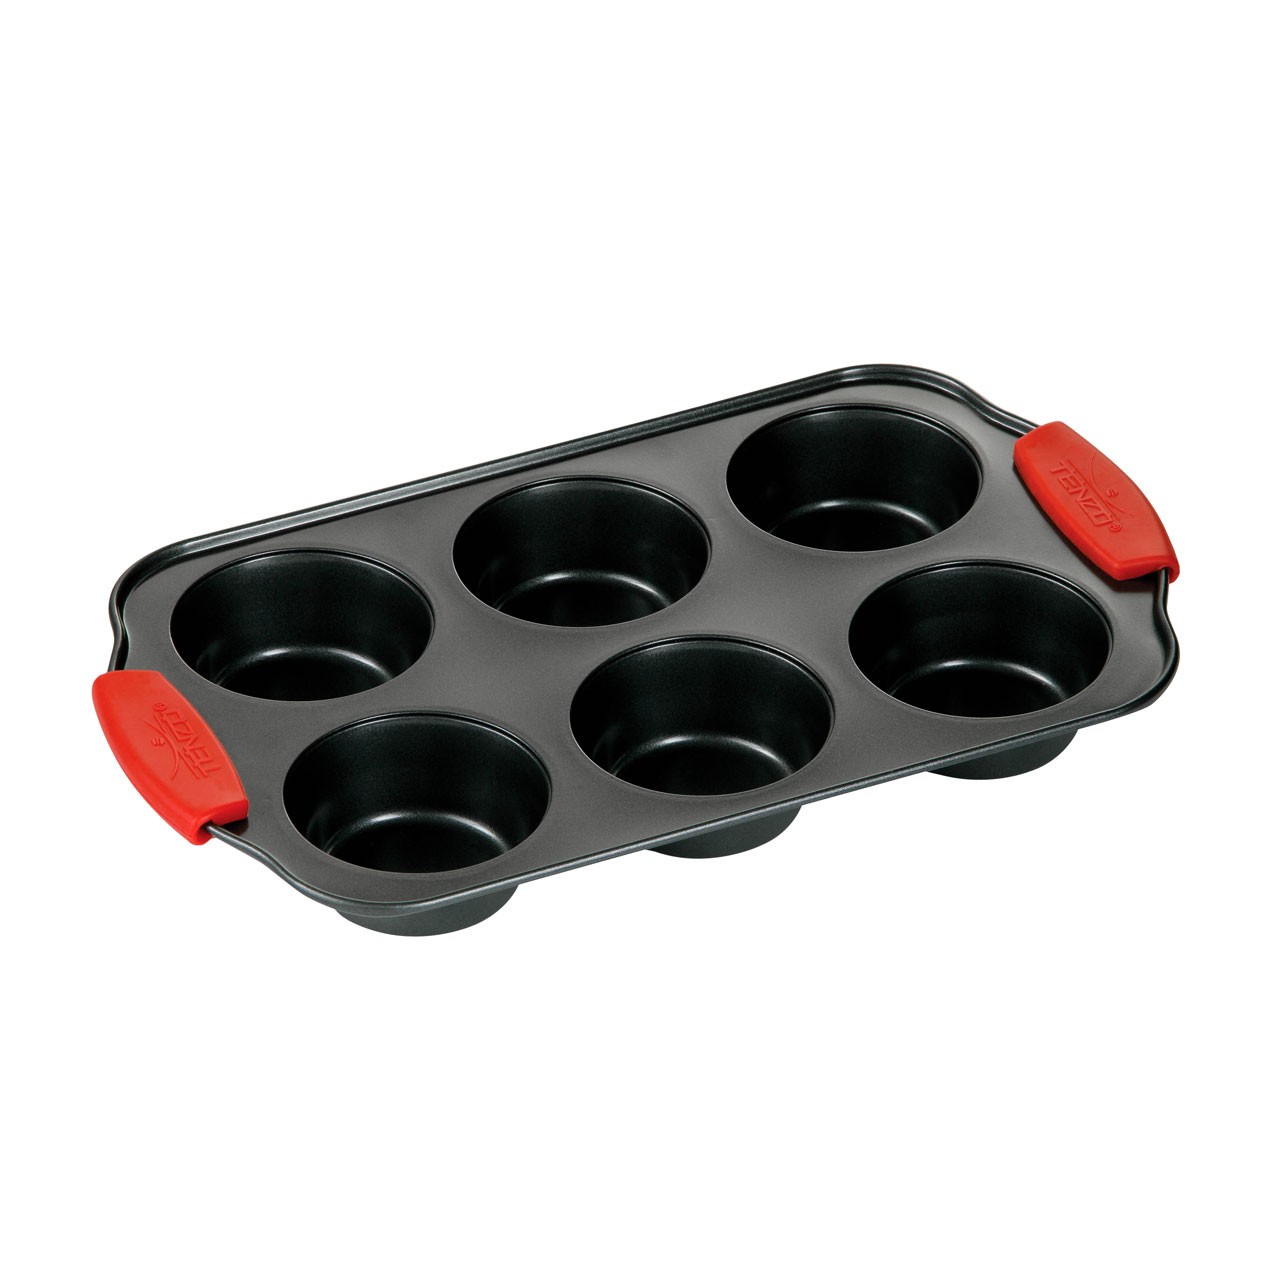 Tenzo Cupcake Tray Carbon Steel Xylan Non-stick Coating - Click Image to Close